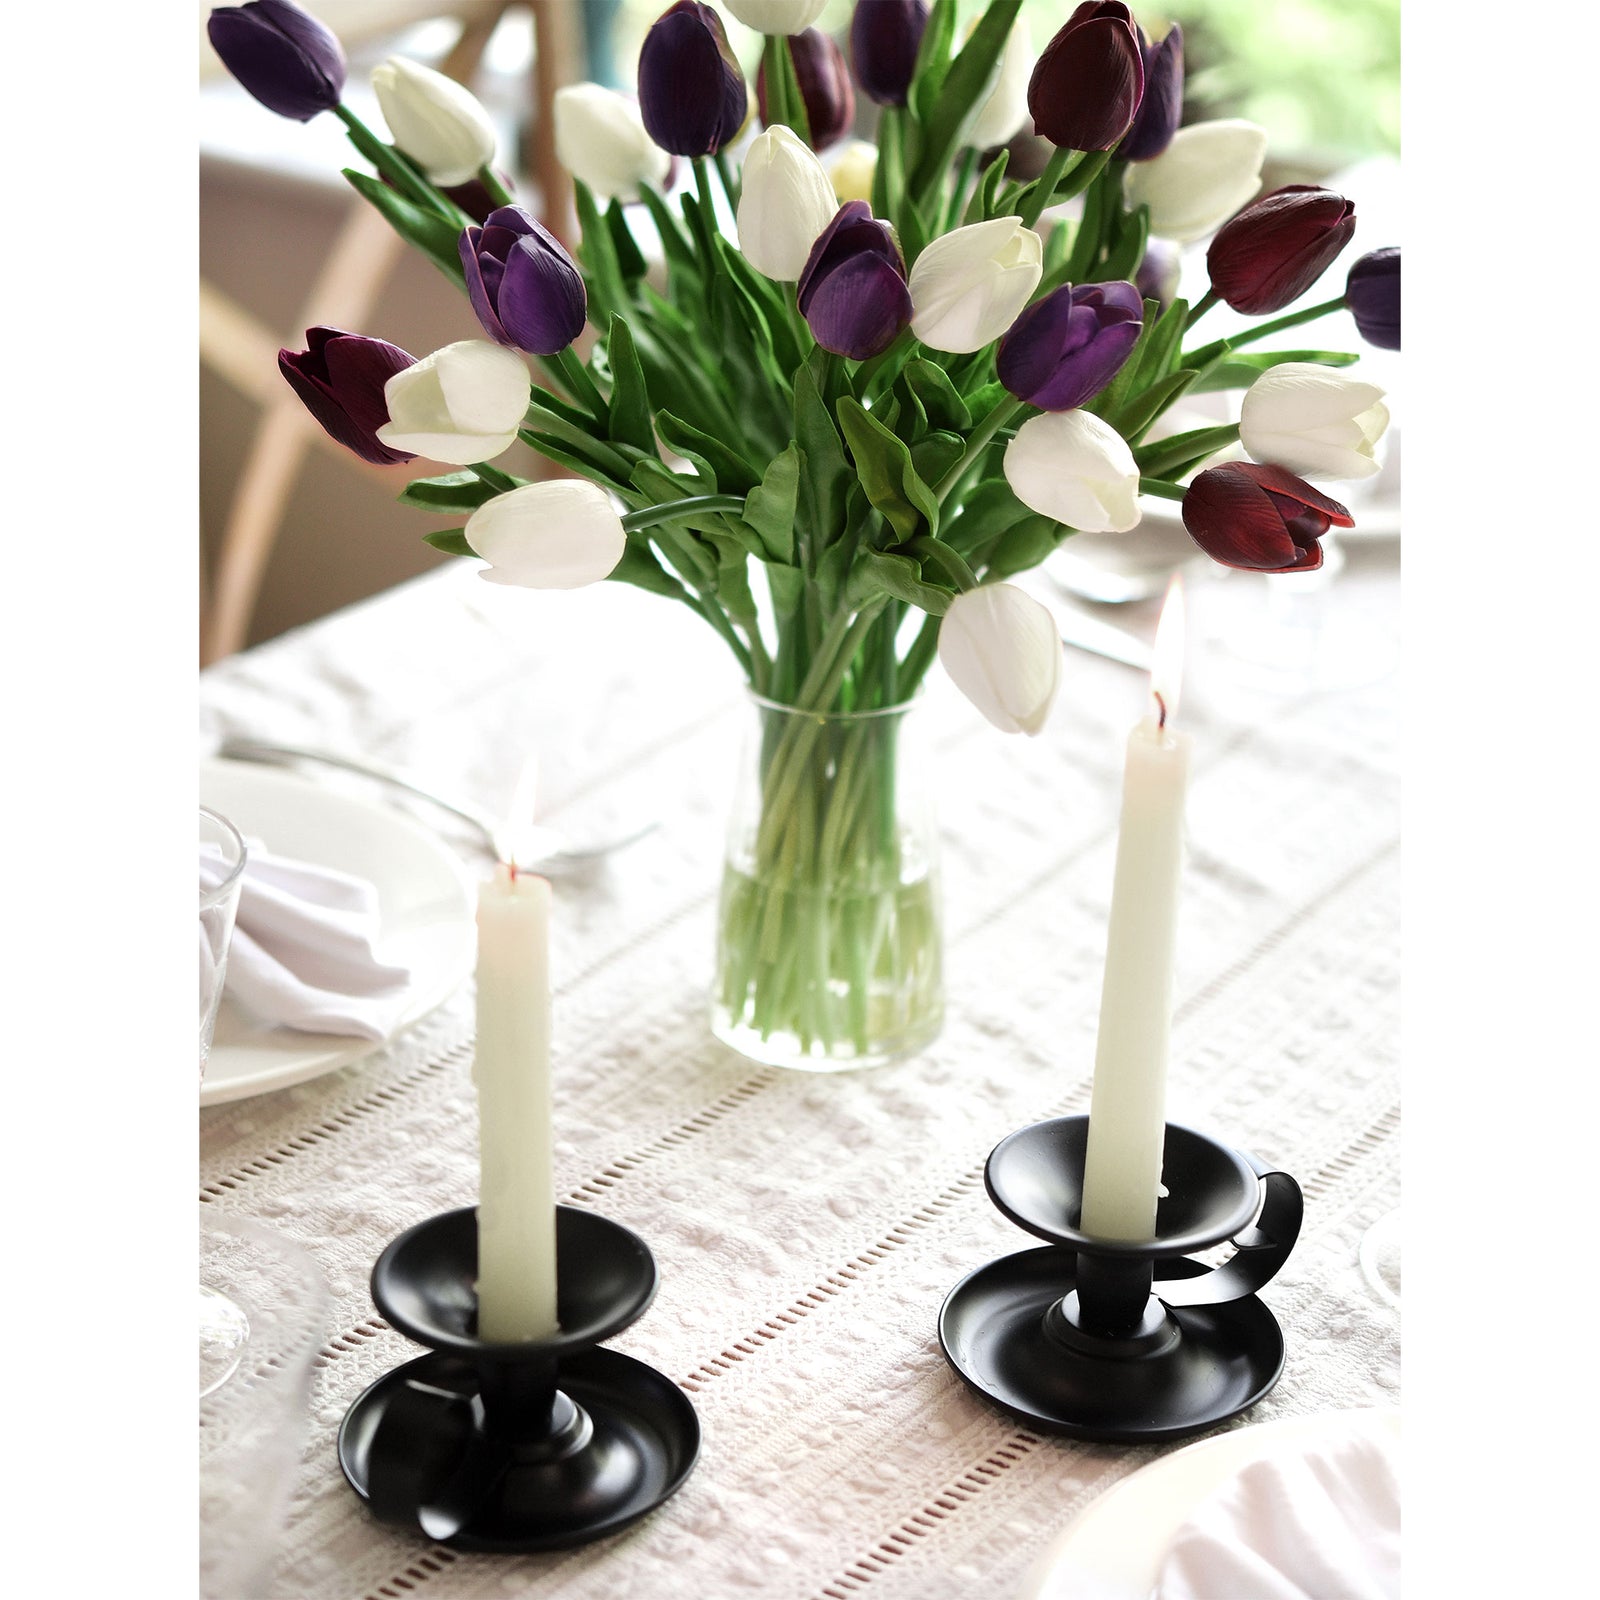 2 Black Plated Saucer Vintage Iron Candle Holders with Handle for Taper Wax Candlesticks